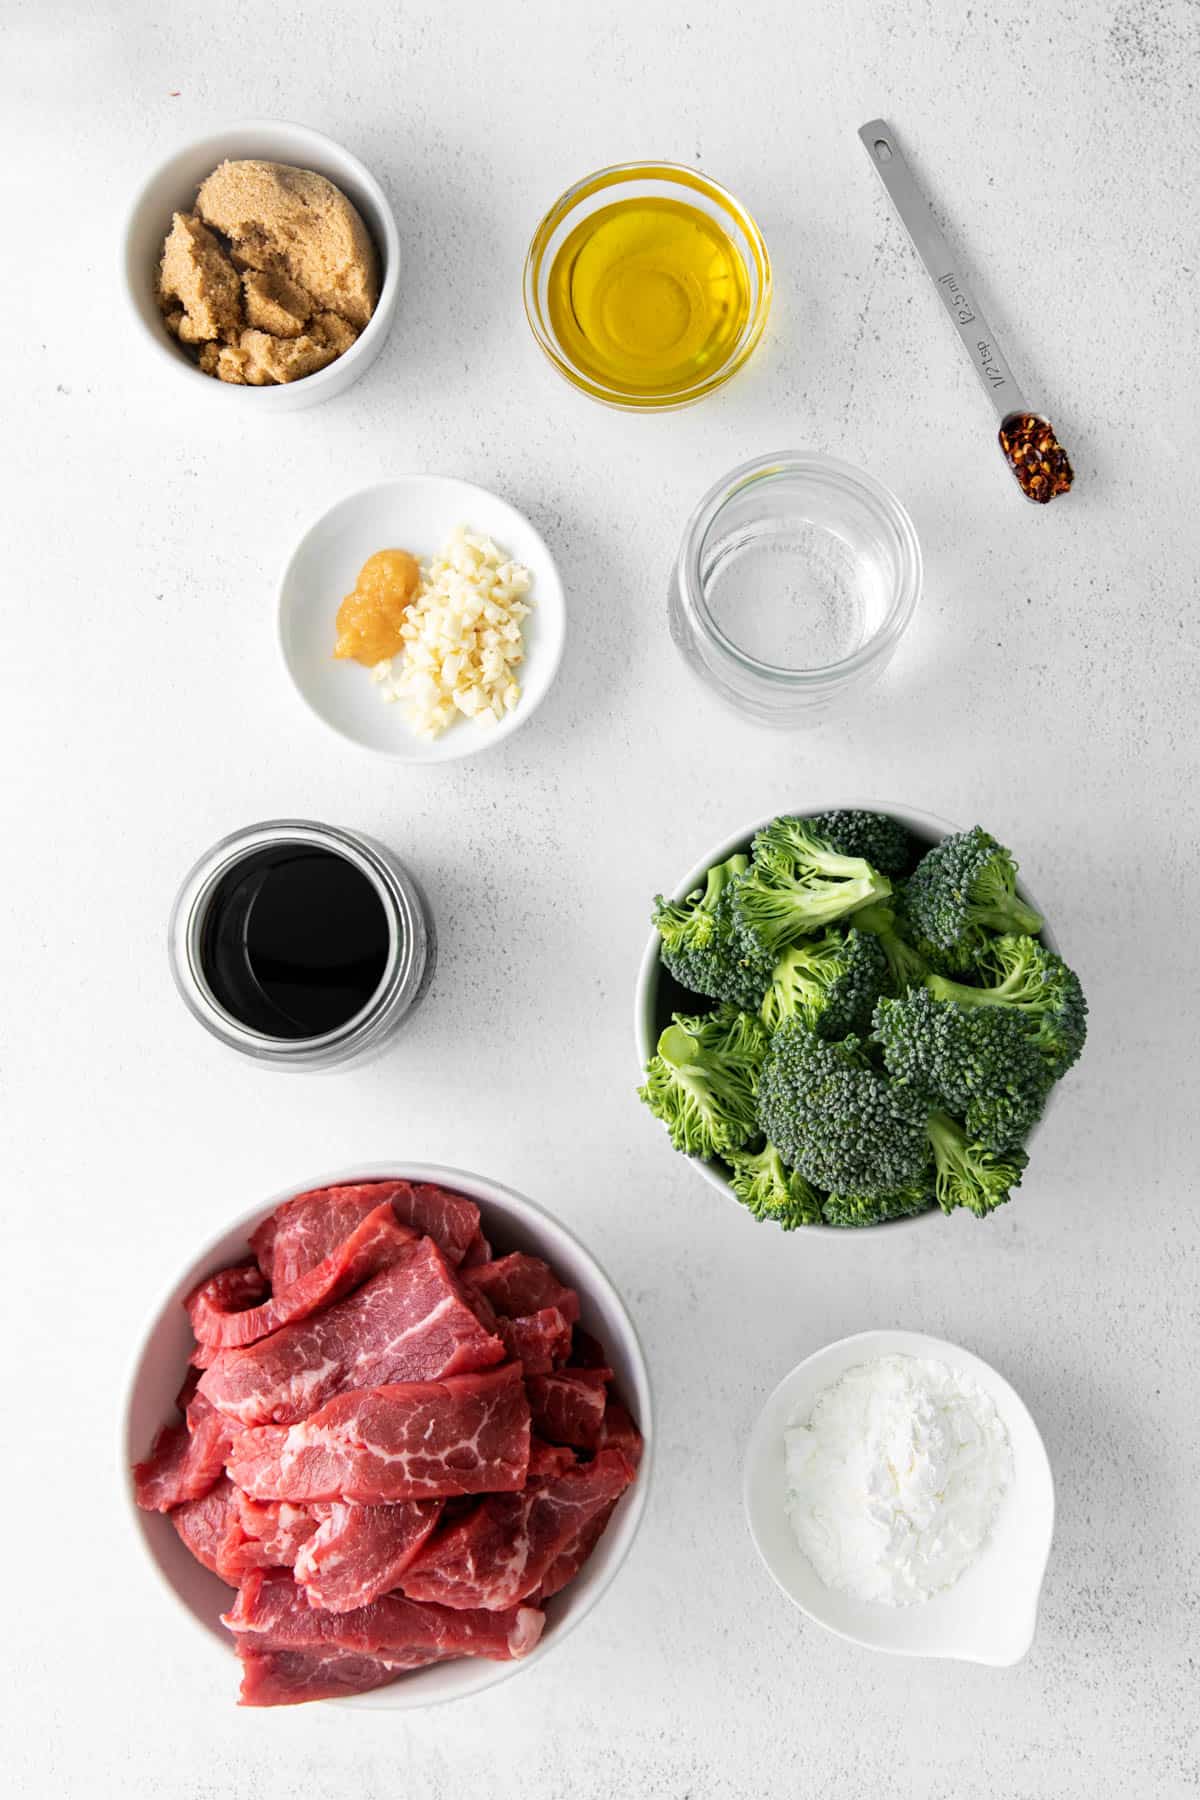 Ingredients for making Instant Pot Mongolian beef.